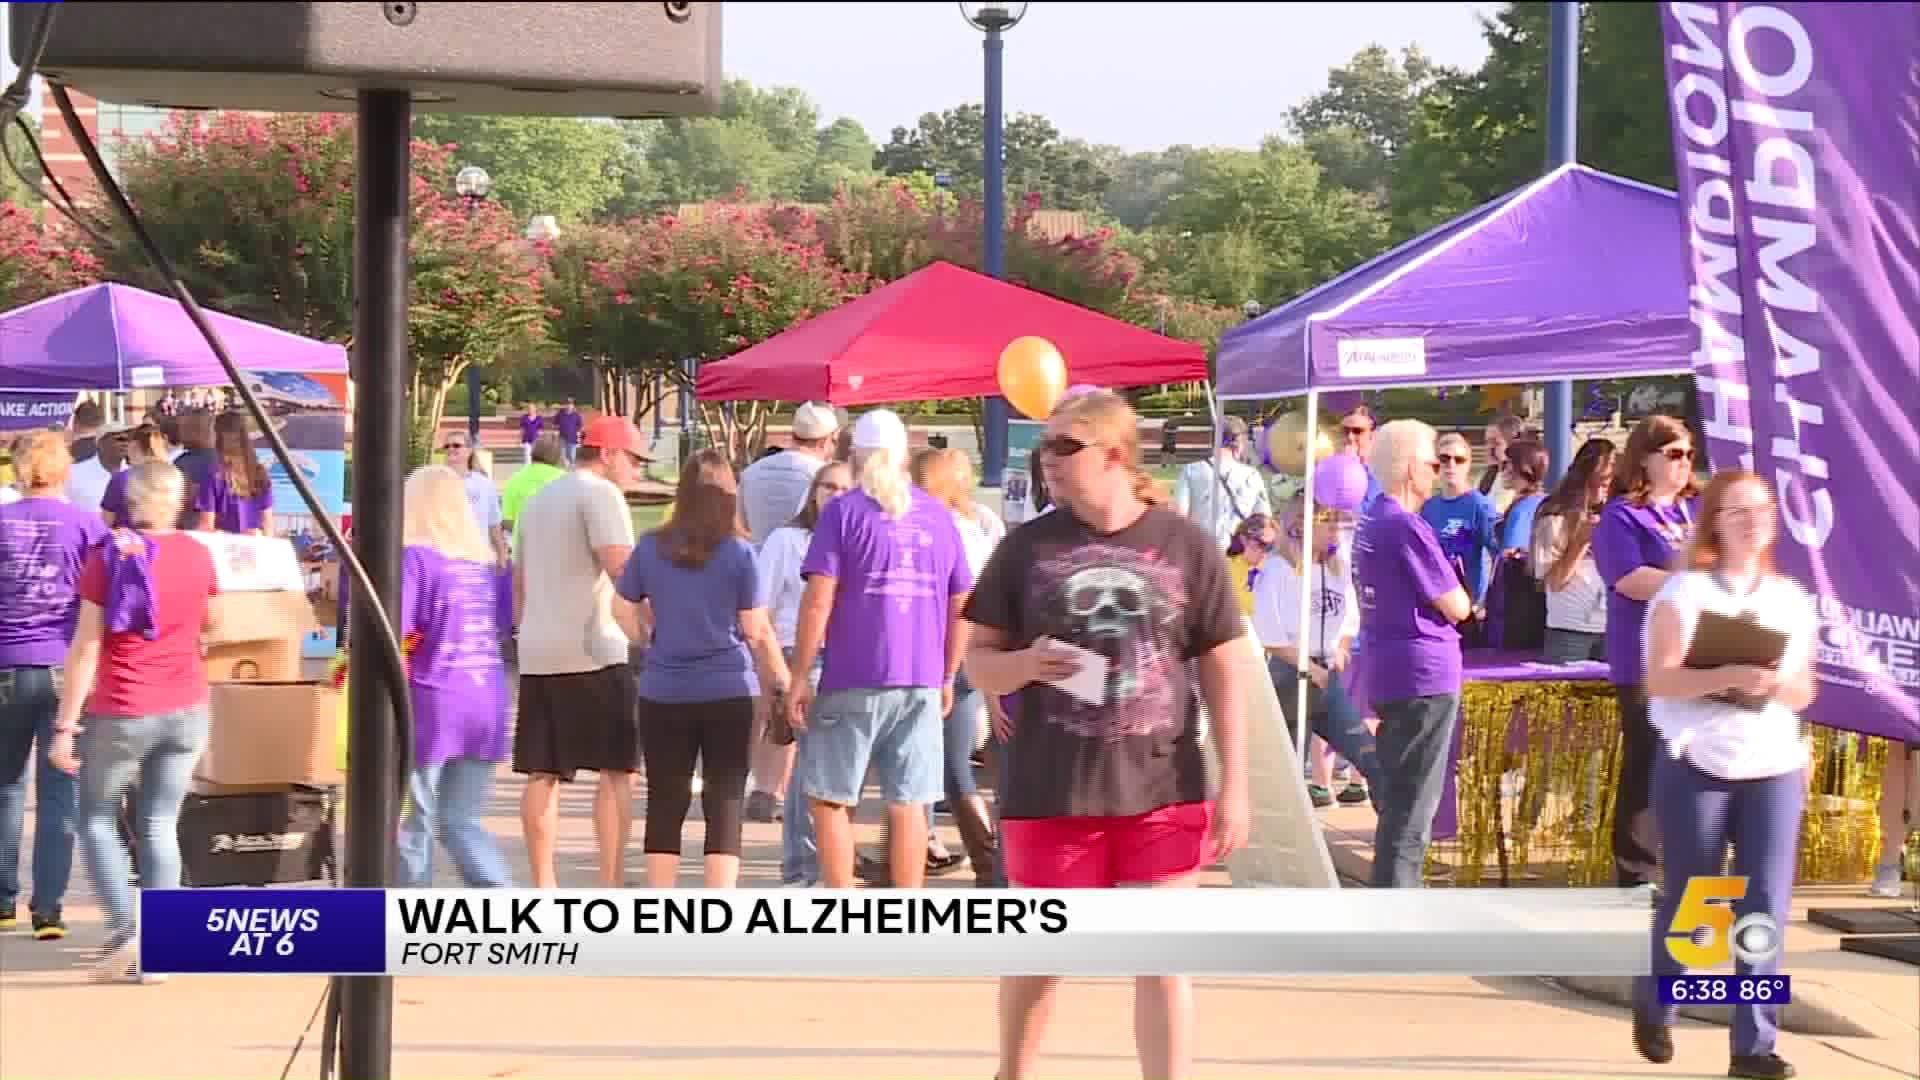 WALK TO END ALZHEIMERS IN FORT SMITH 2019